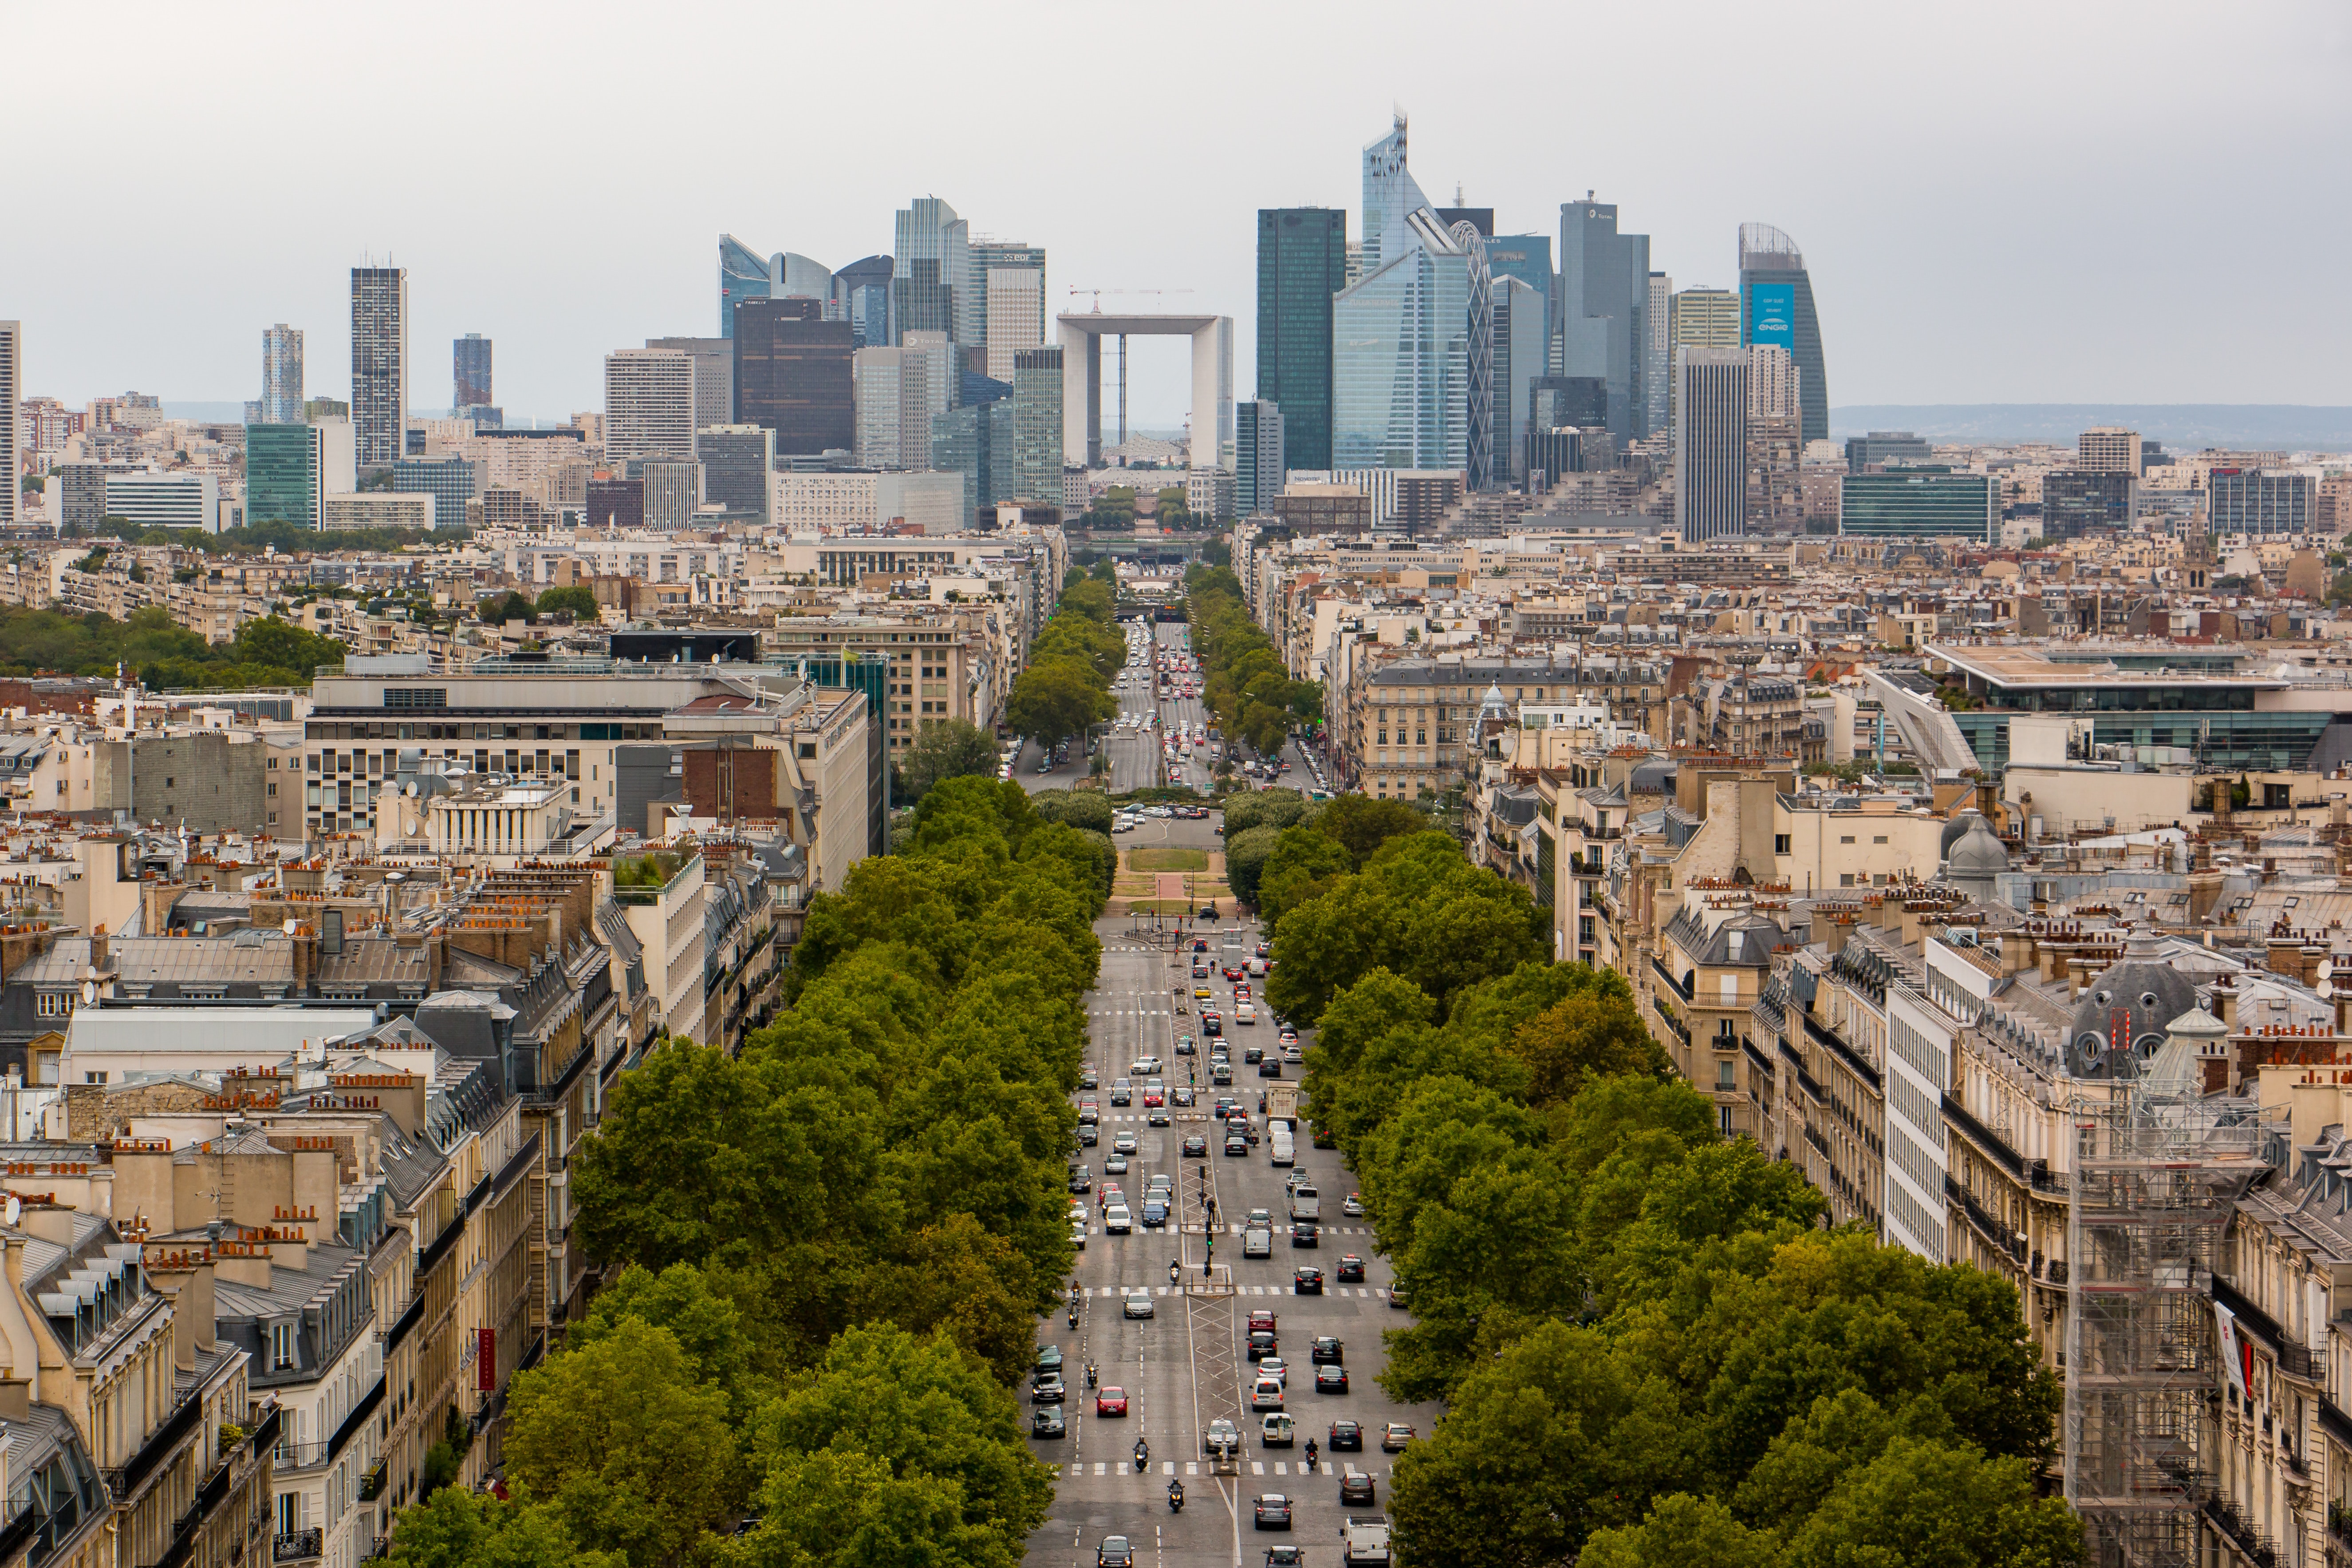 A view of La Defense from the top of the Arc de Triomphe